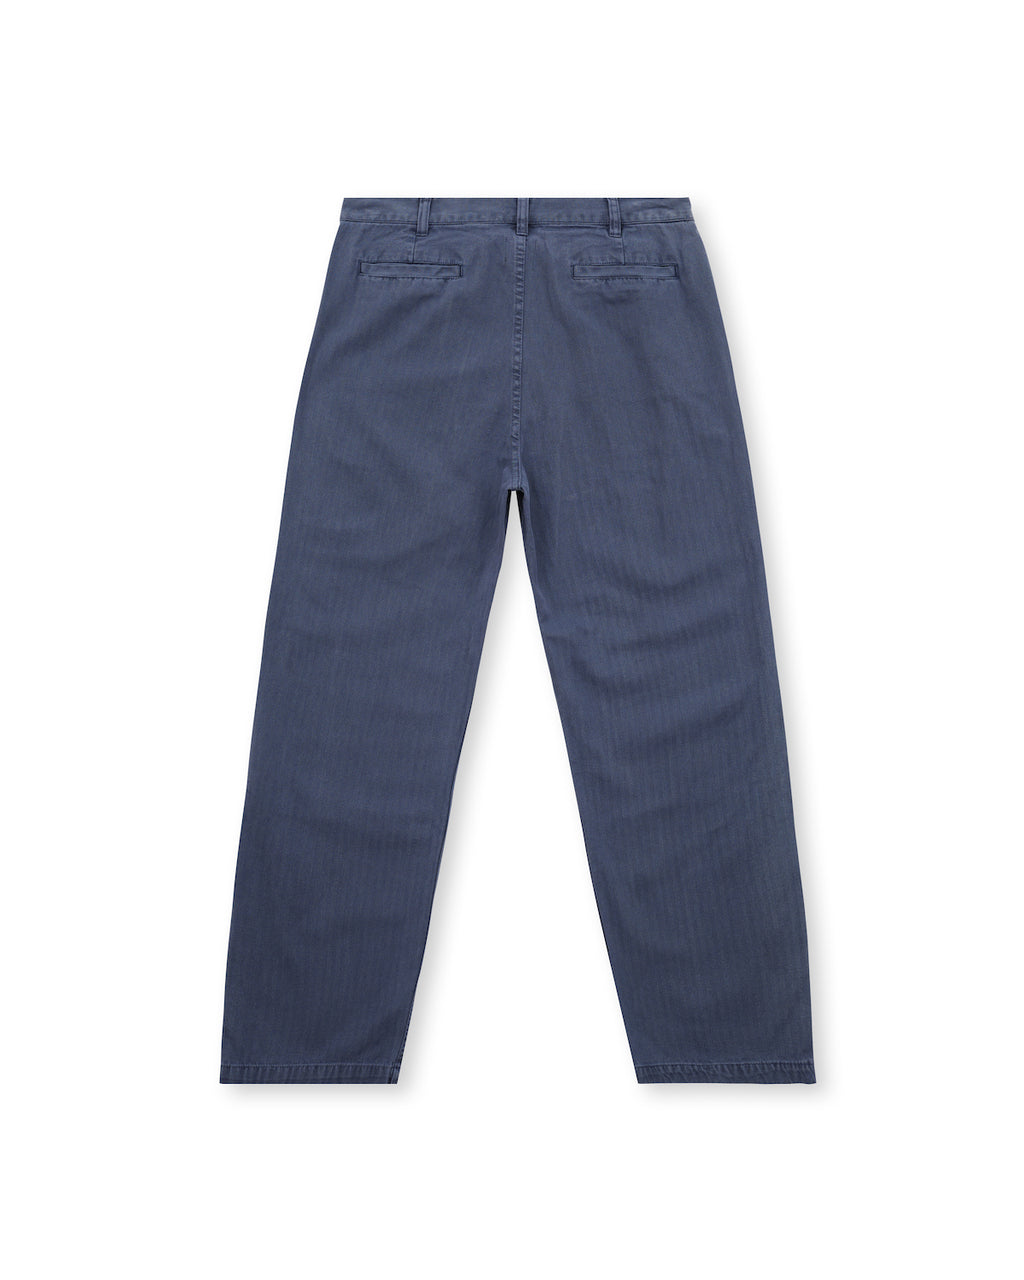 Livewire Pigment Dyed Herringbone Pant - Washed Navy 2